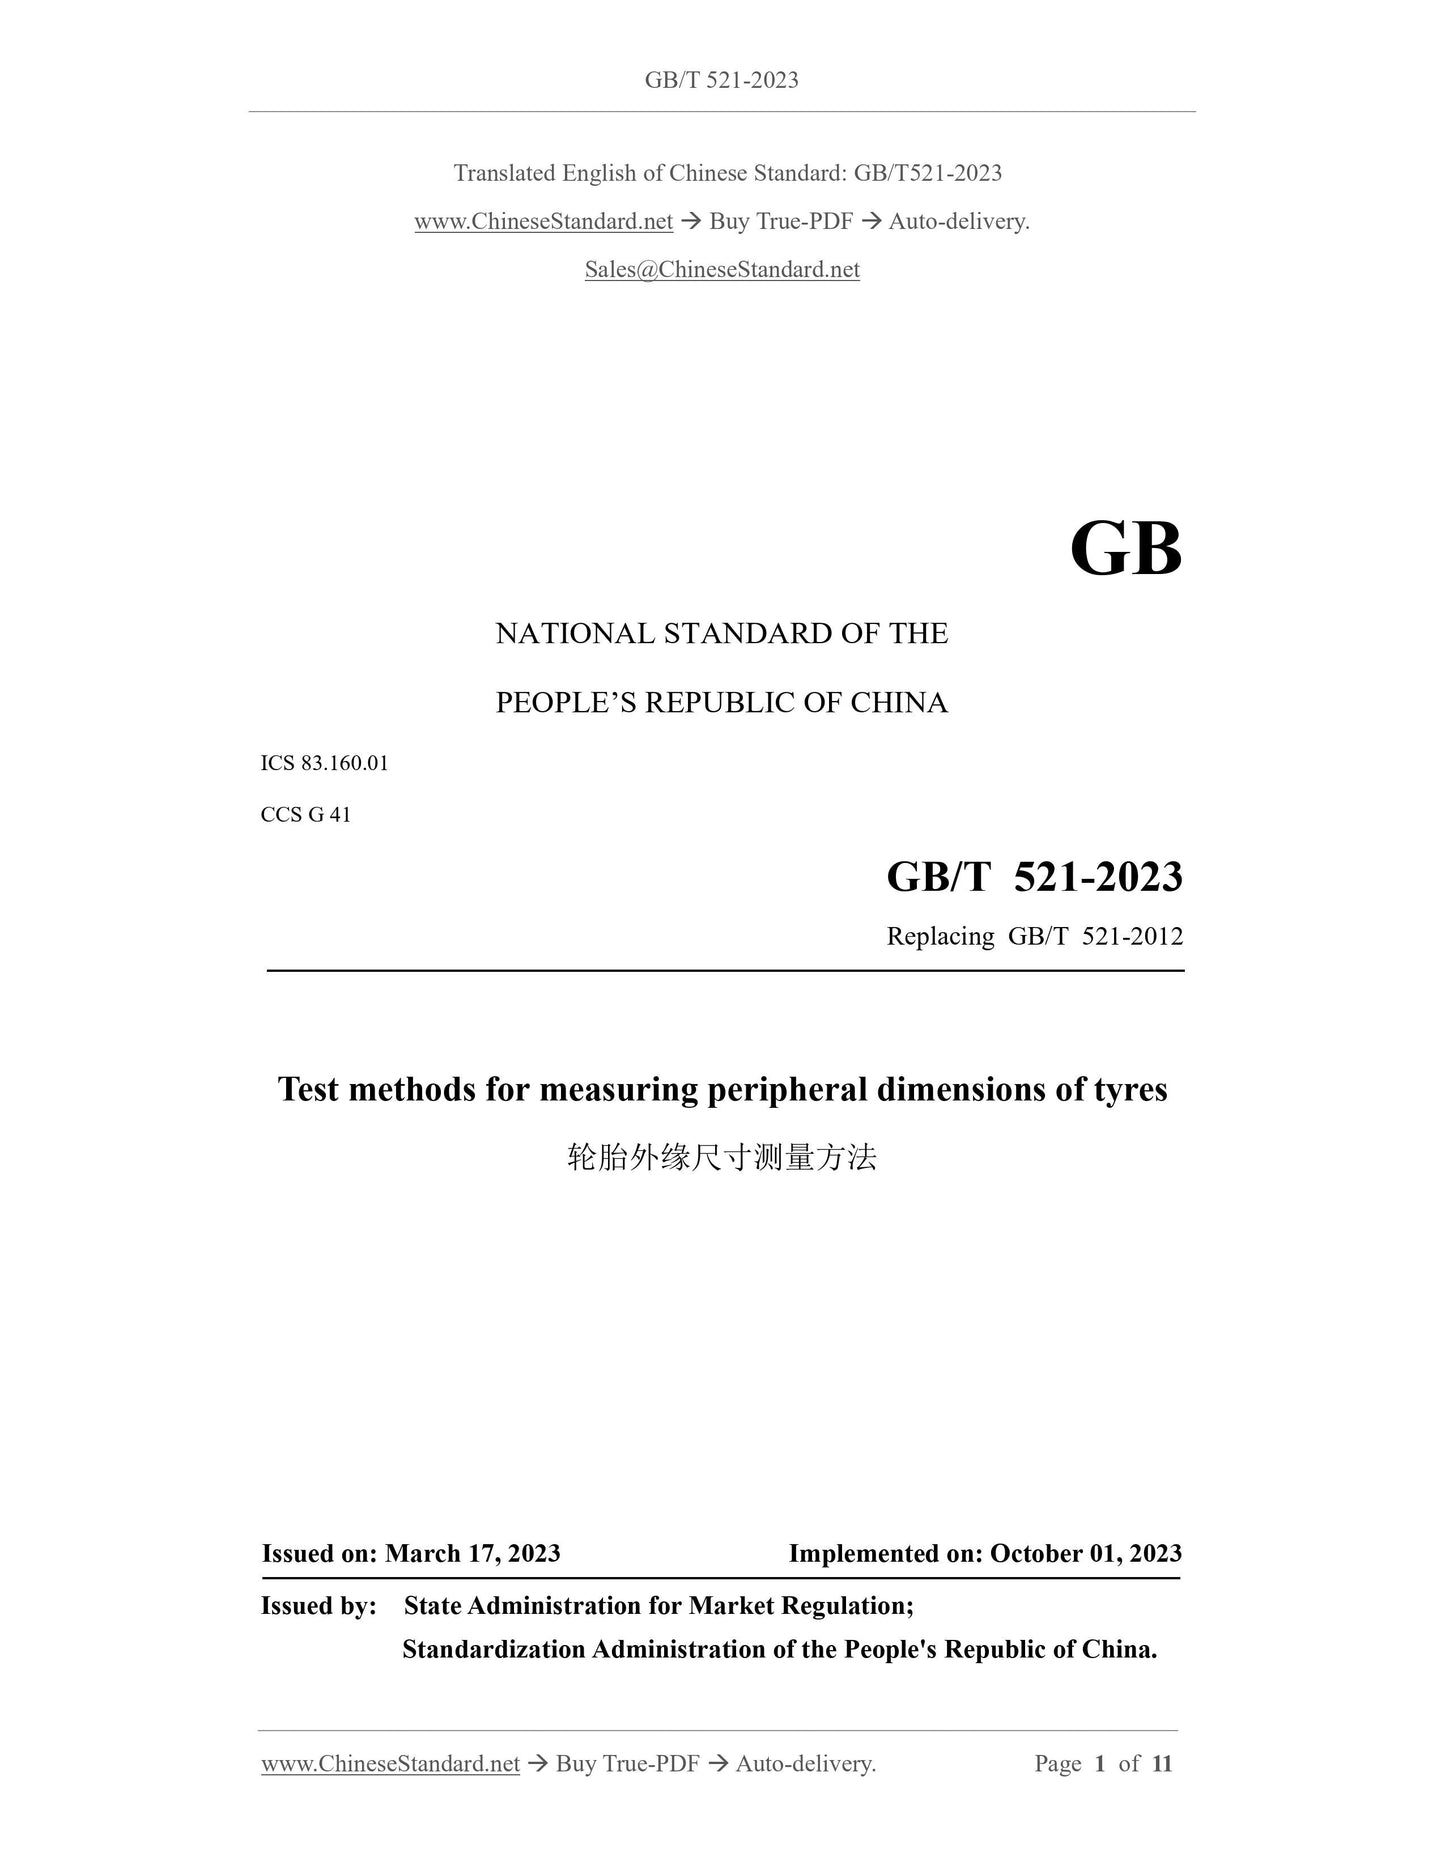 GB/T 521-2023 Page 1